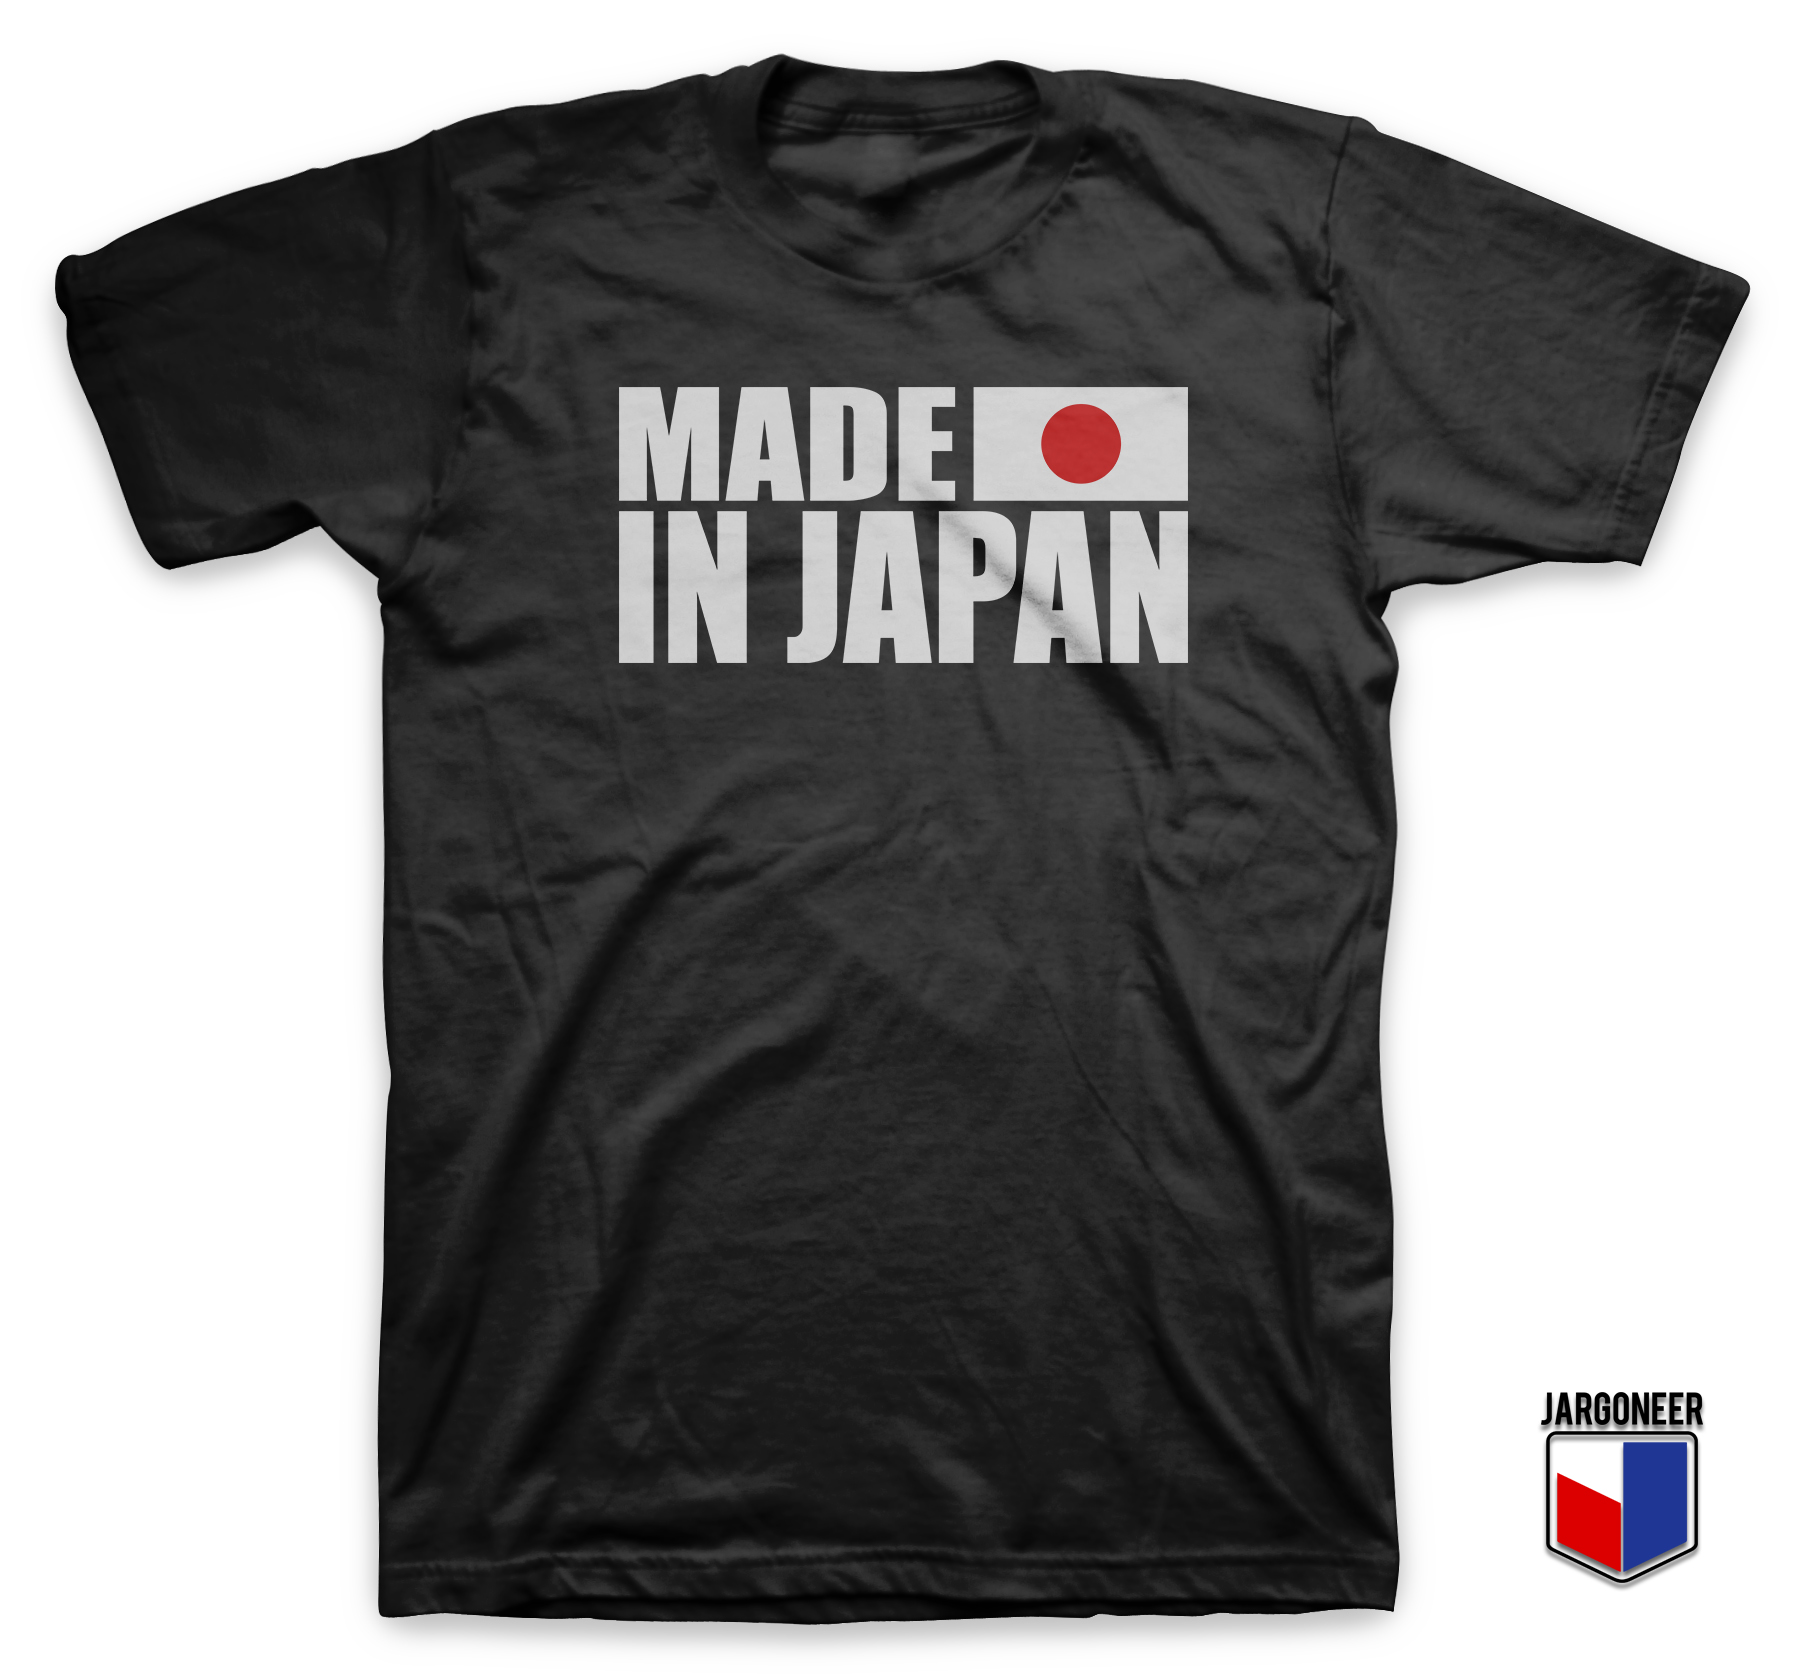 Made in Japan одежда. Футболки Human made in Japan. Cool Shirt. Follow the Sun футболка. Only quality